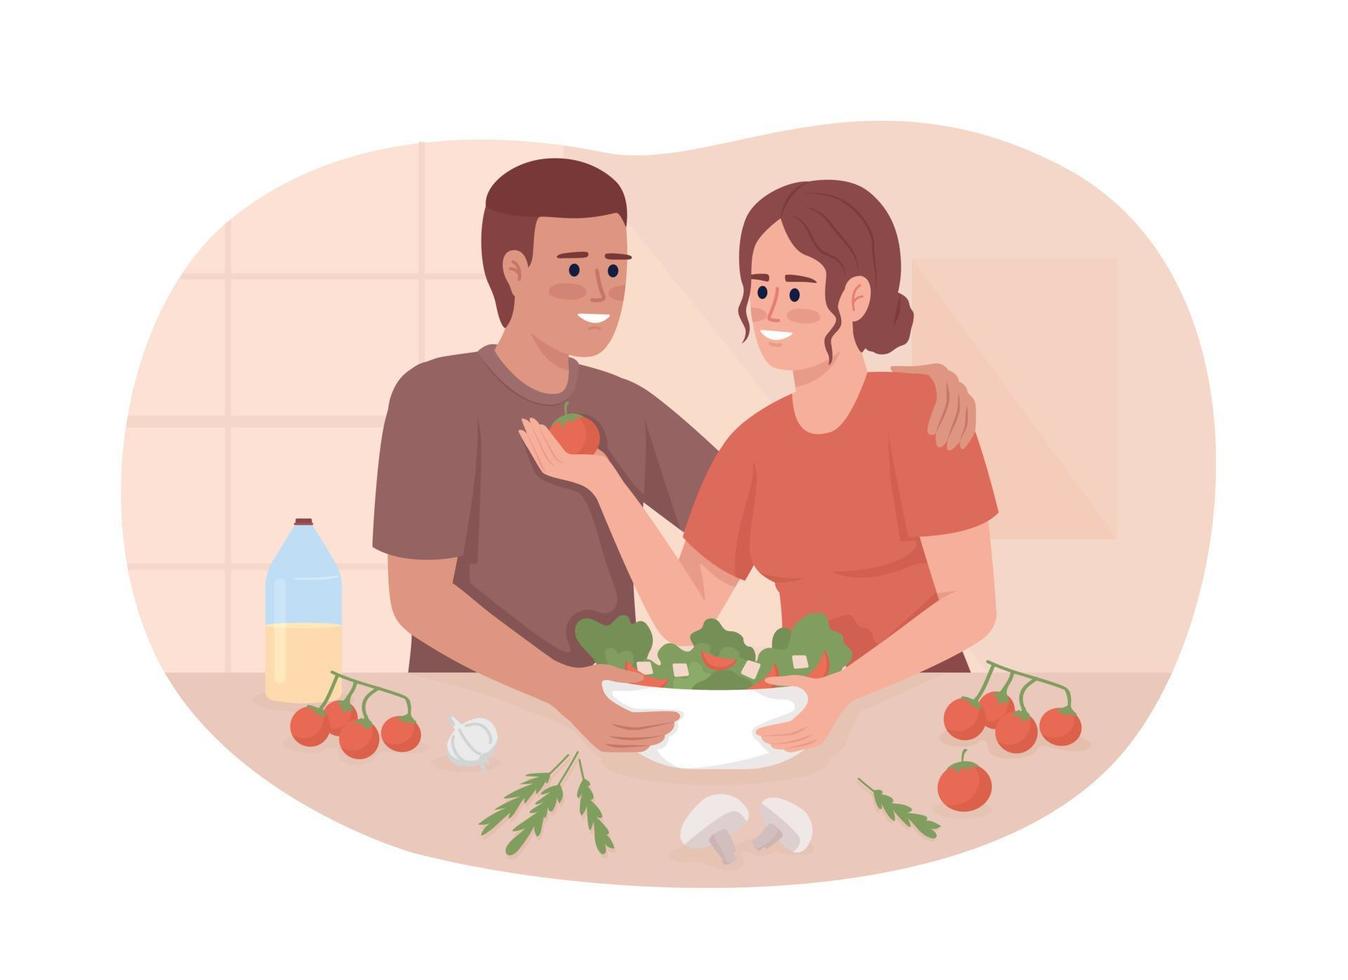 Joyful couple cooking together 2D vector isolated illustration. Happy moment in relationship flat characters on cartoon background. Colorful editable scene for mobile, website, presentation